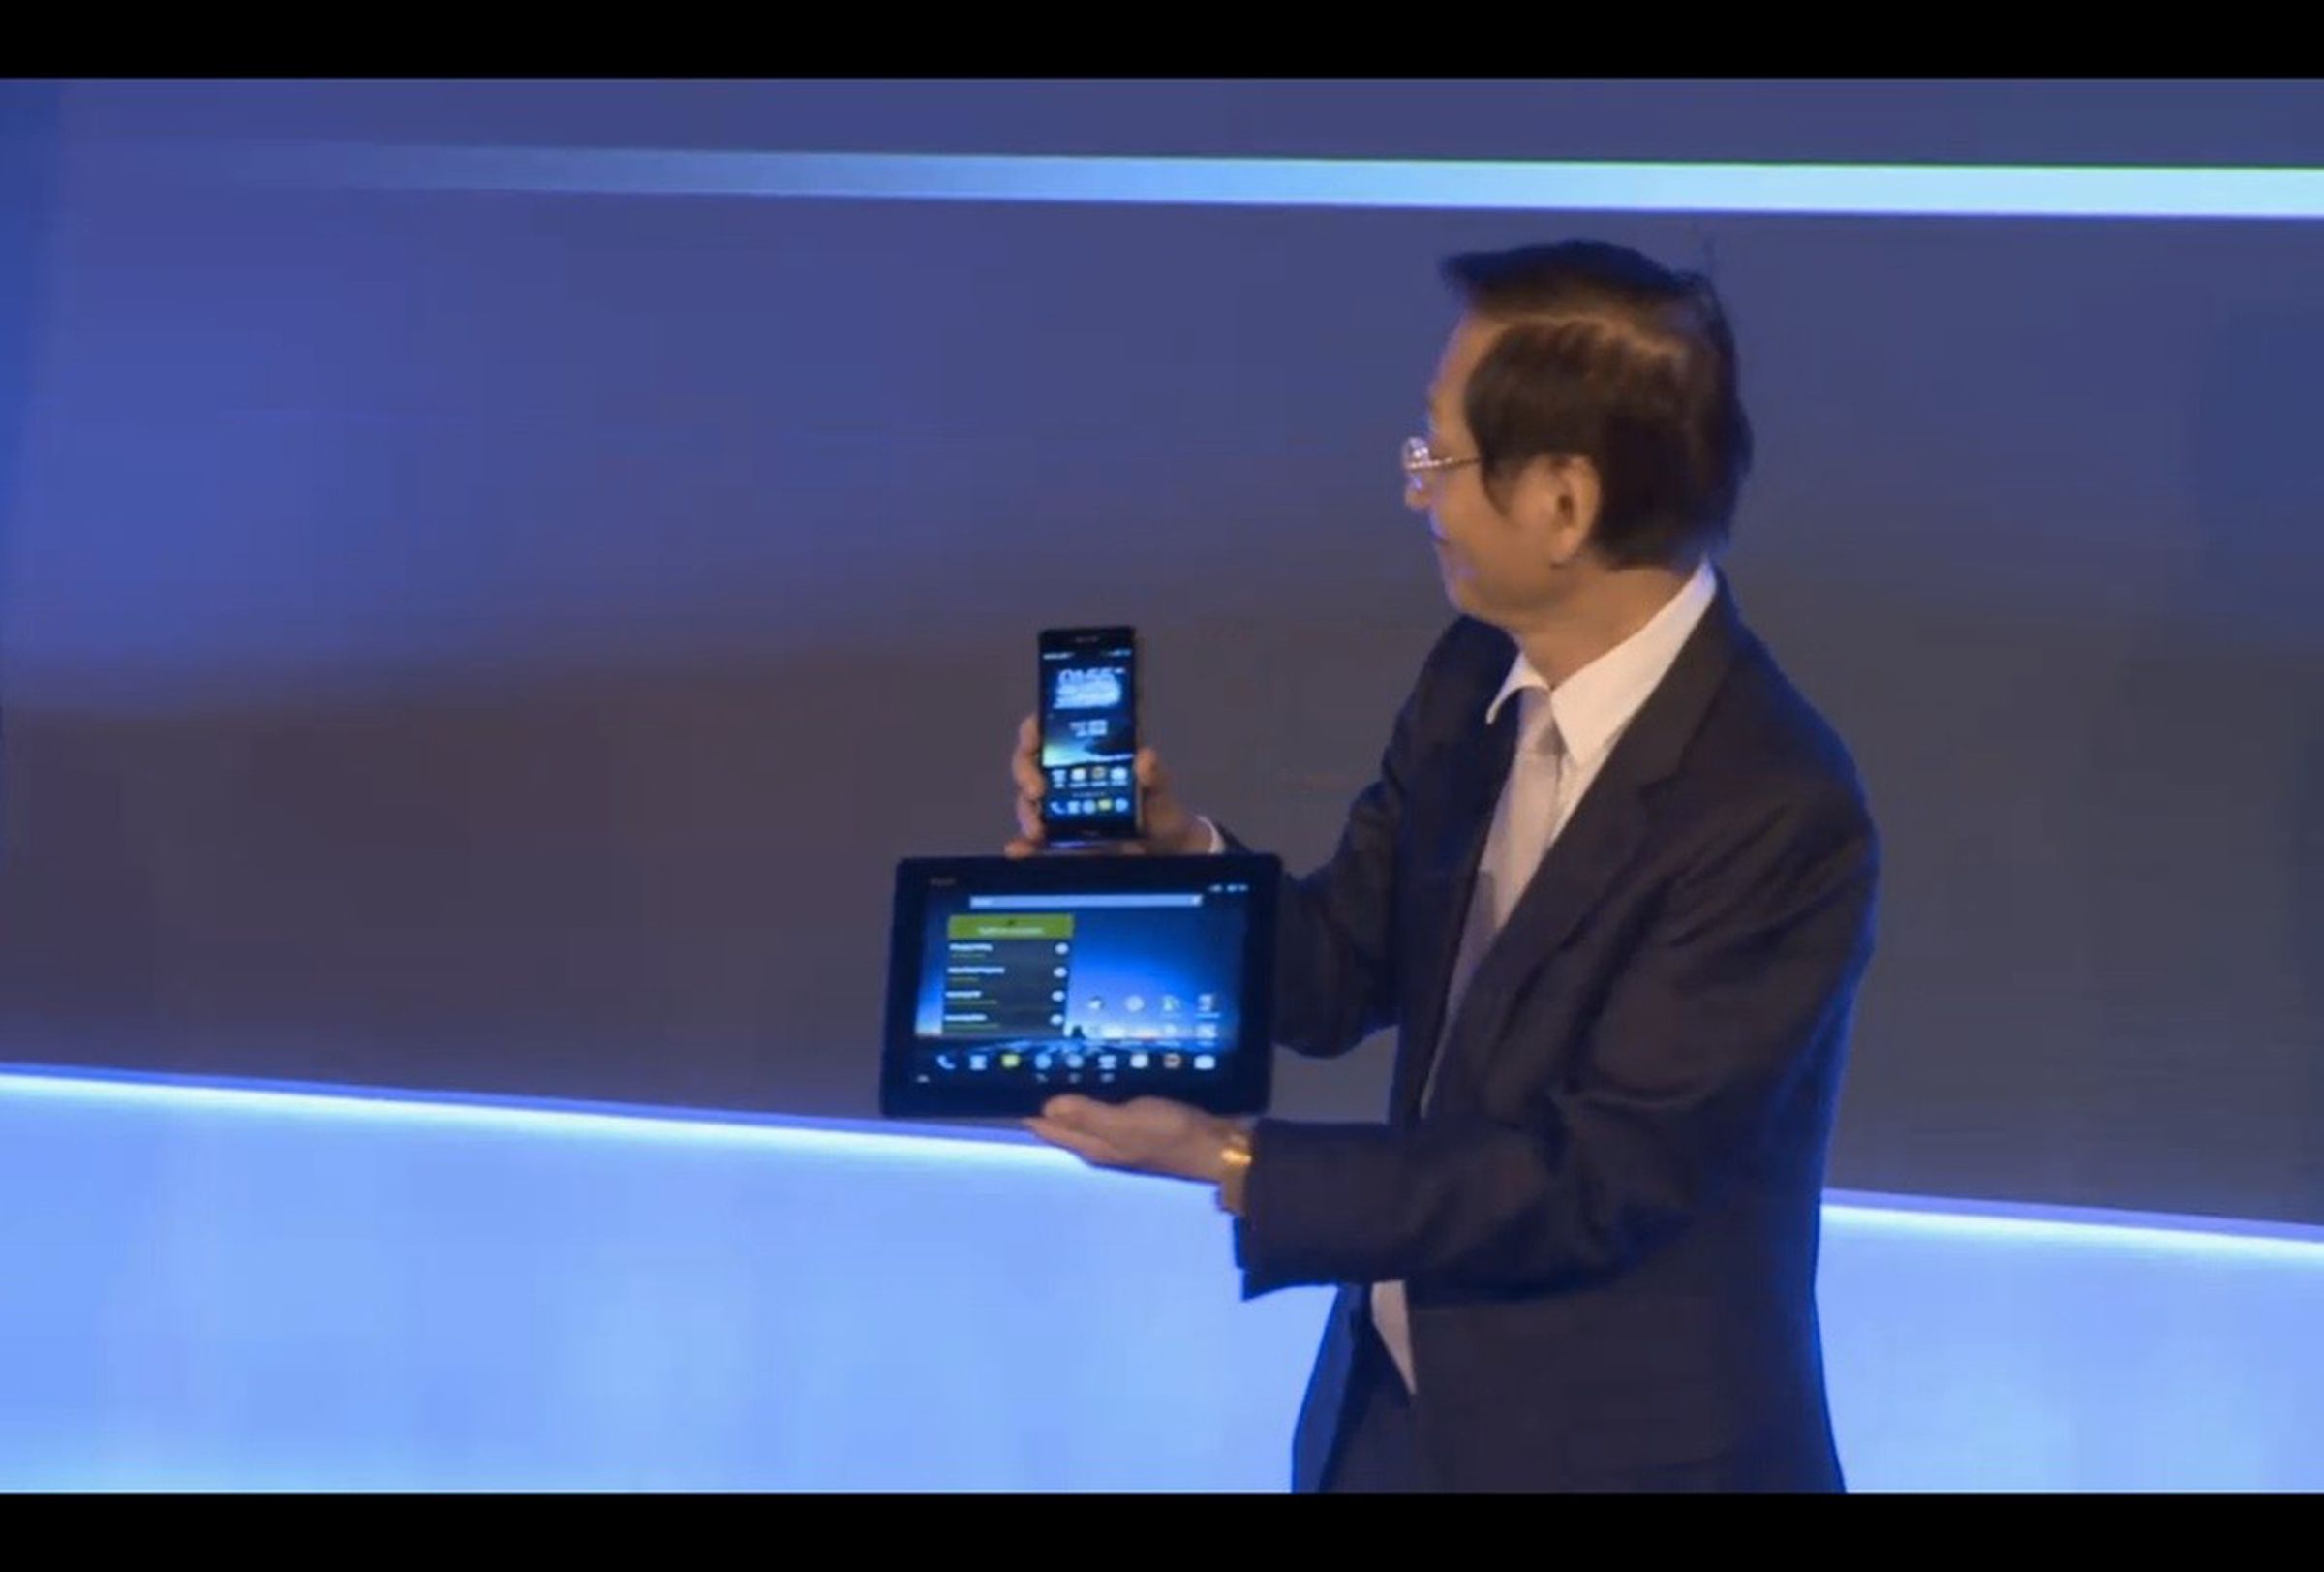 Asus Padfone Infinity livestream pictures